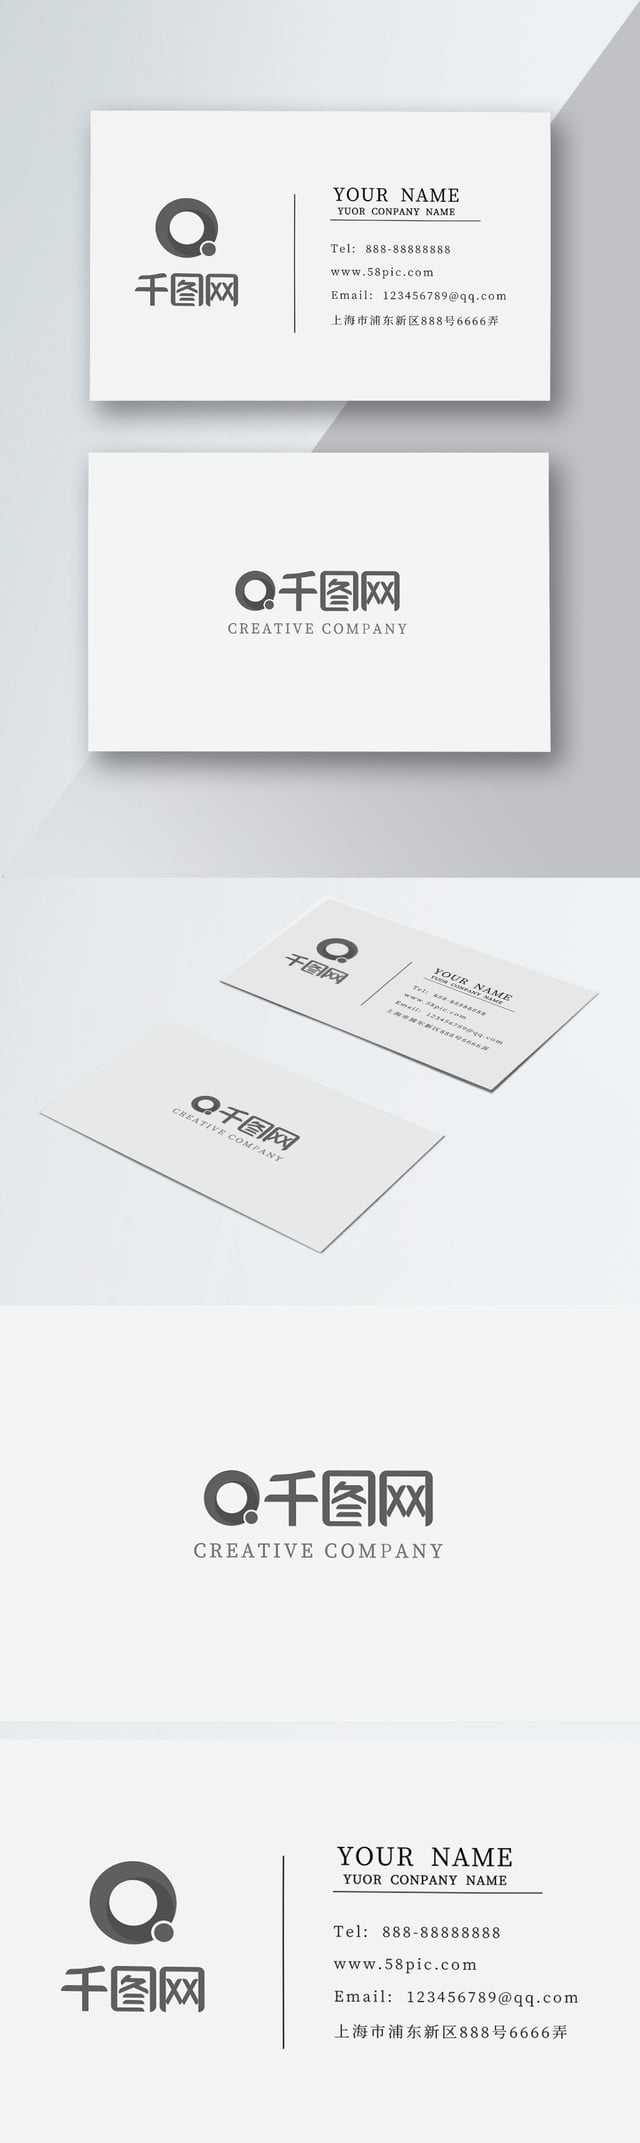 Minimalist Business Card Design Corporate Information In Free Personal Business Card Templates